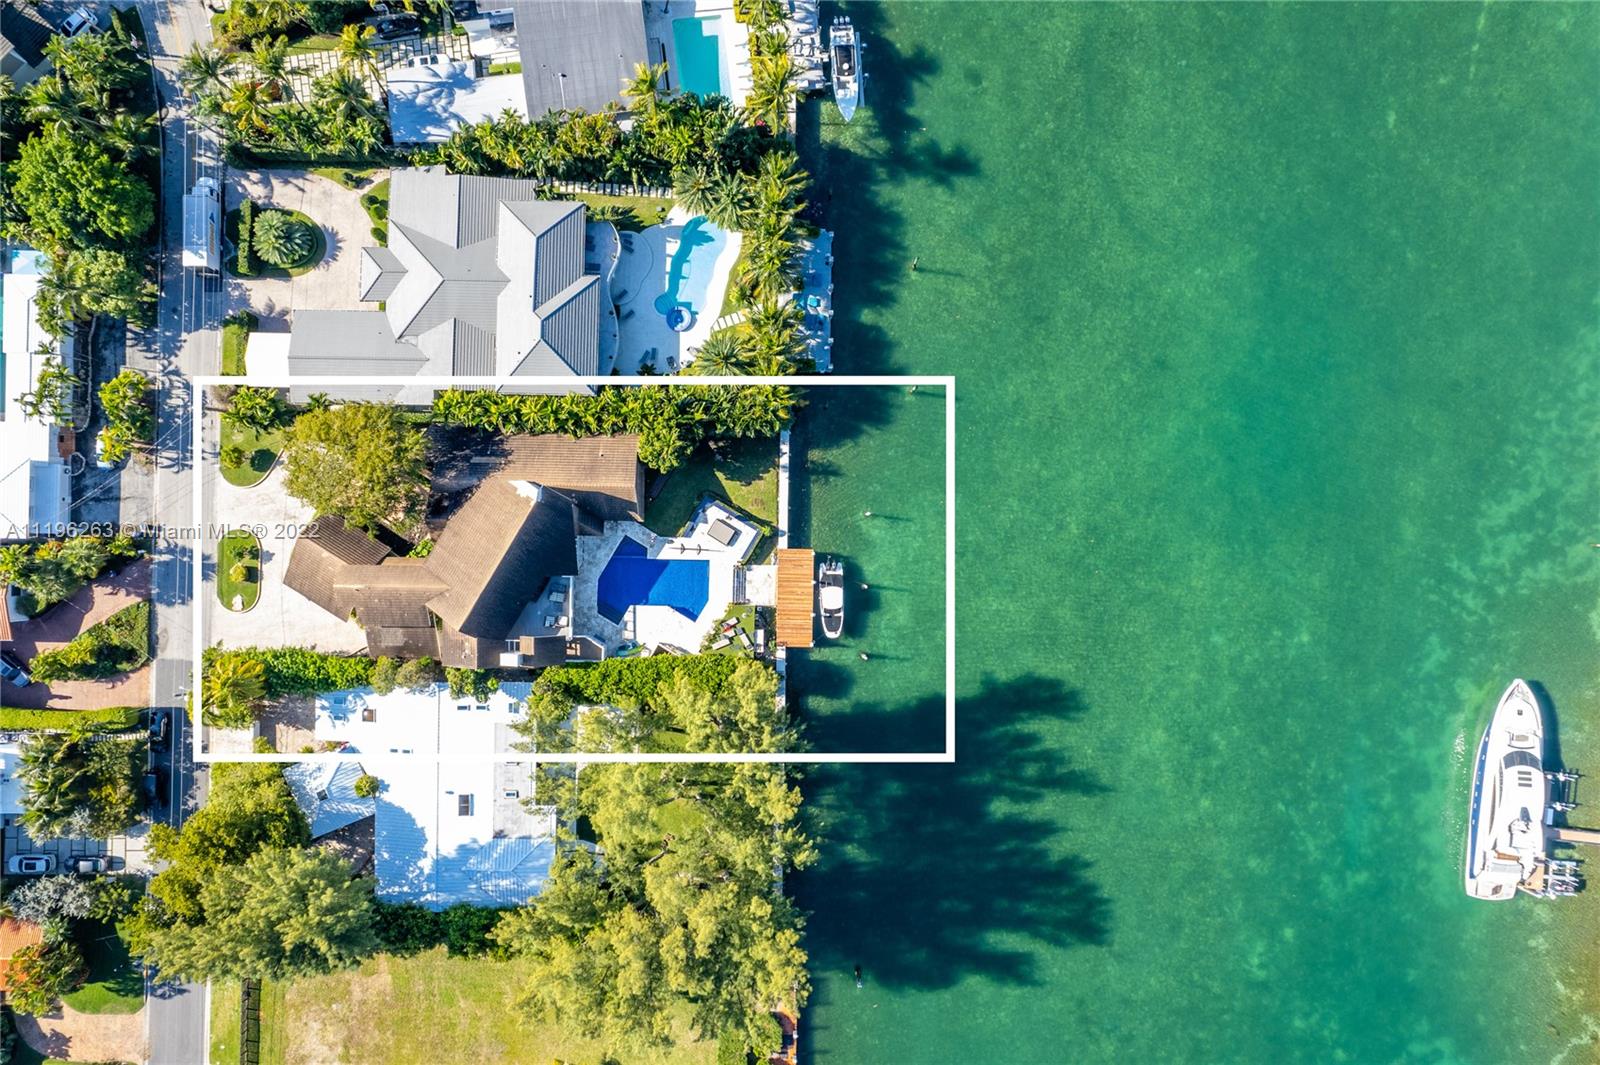 This architecturally unique 6,600 SF home was designed by Barry Sugarman and sits on an oversized 18,400 SF lot with 92 LF on the water. It has soaring 25’ ceilings, large living spaces, massive terraces, and stunning views of a wide waterway and Indian Creek Island. It also has a home theater, office, gym, playroom, and large eat in kitchen that opens up to a patio. The primary bedroom is on the ground floor and features his and hers baths. This beautiful home has impact windows, a two car garage, and a brand new, oversized dock. It’s the perfect family home on a cul-de-sac, and minutes from the ocean, Bal Harbour Shops, and restaurants.